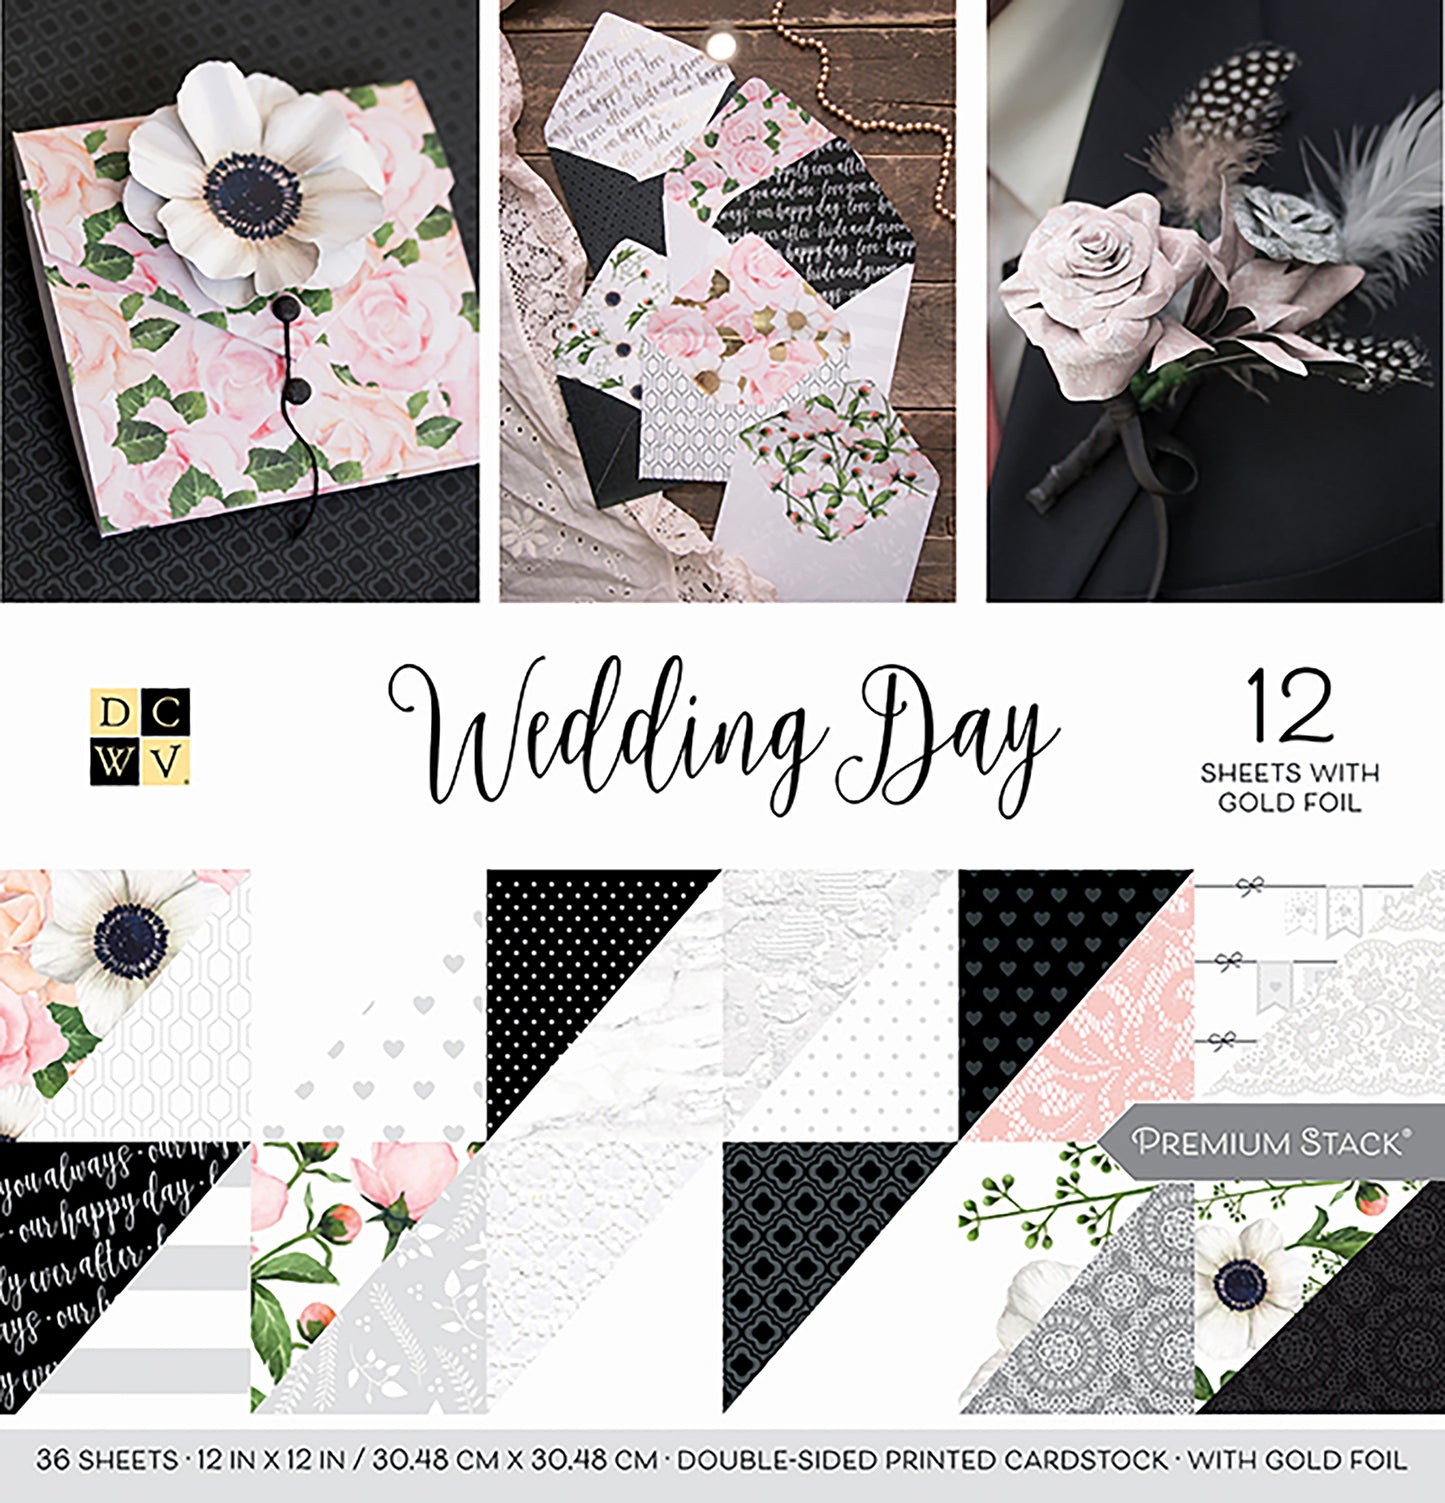 DCWV Double-Sided Cardstock Stack 12"X12" 36/Pkg-Wedding Day, 18 Designs/2 Each